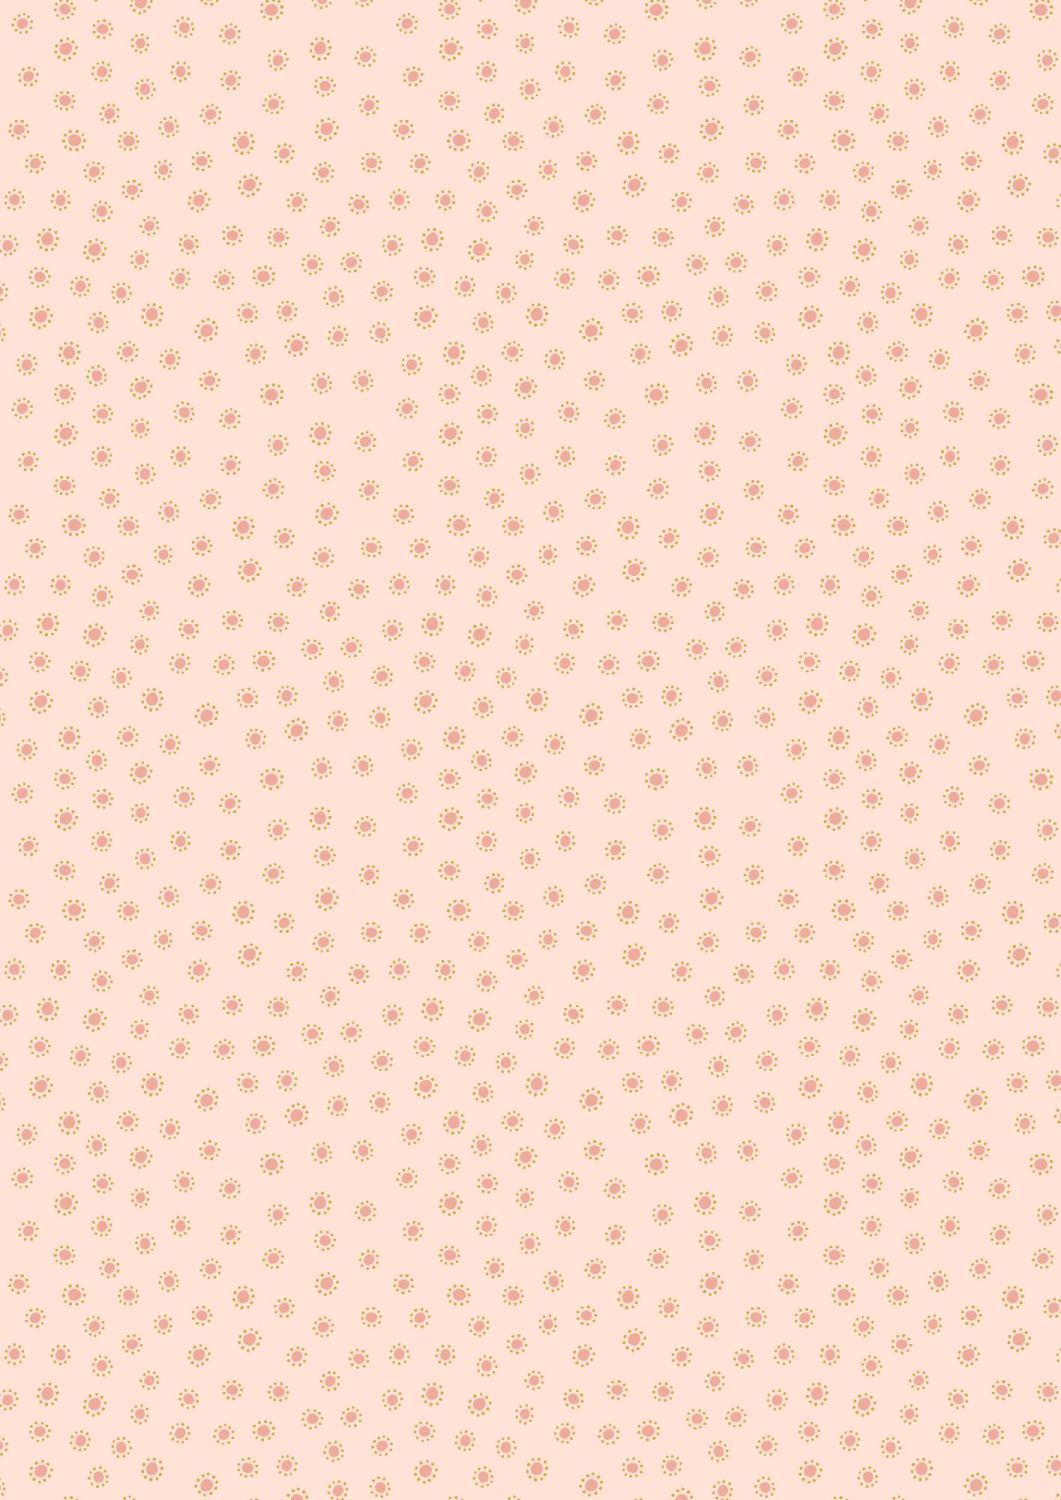 Lewis and Irene - Hannah's Flowers - Dotty Dots on Rose Pink